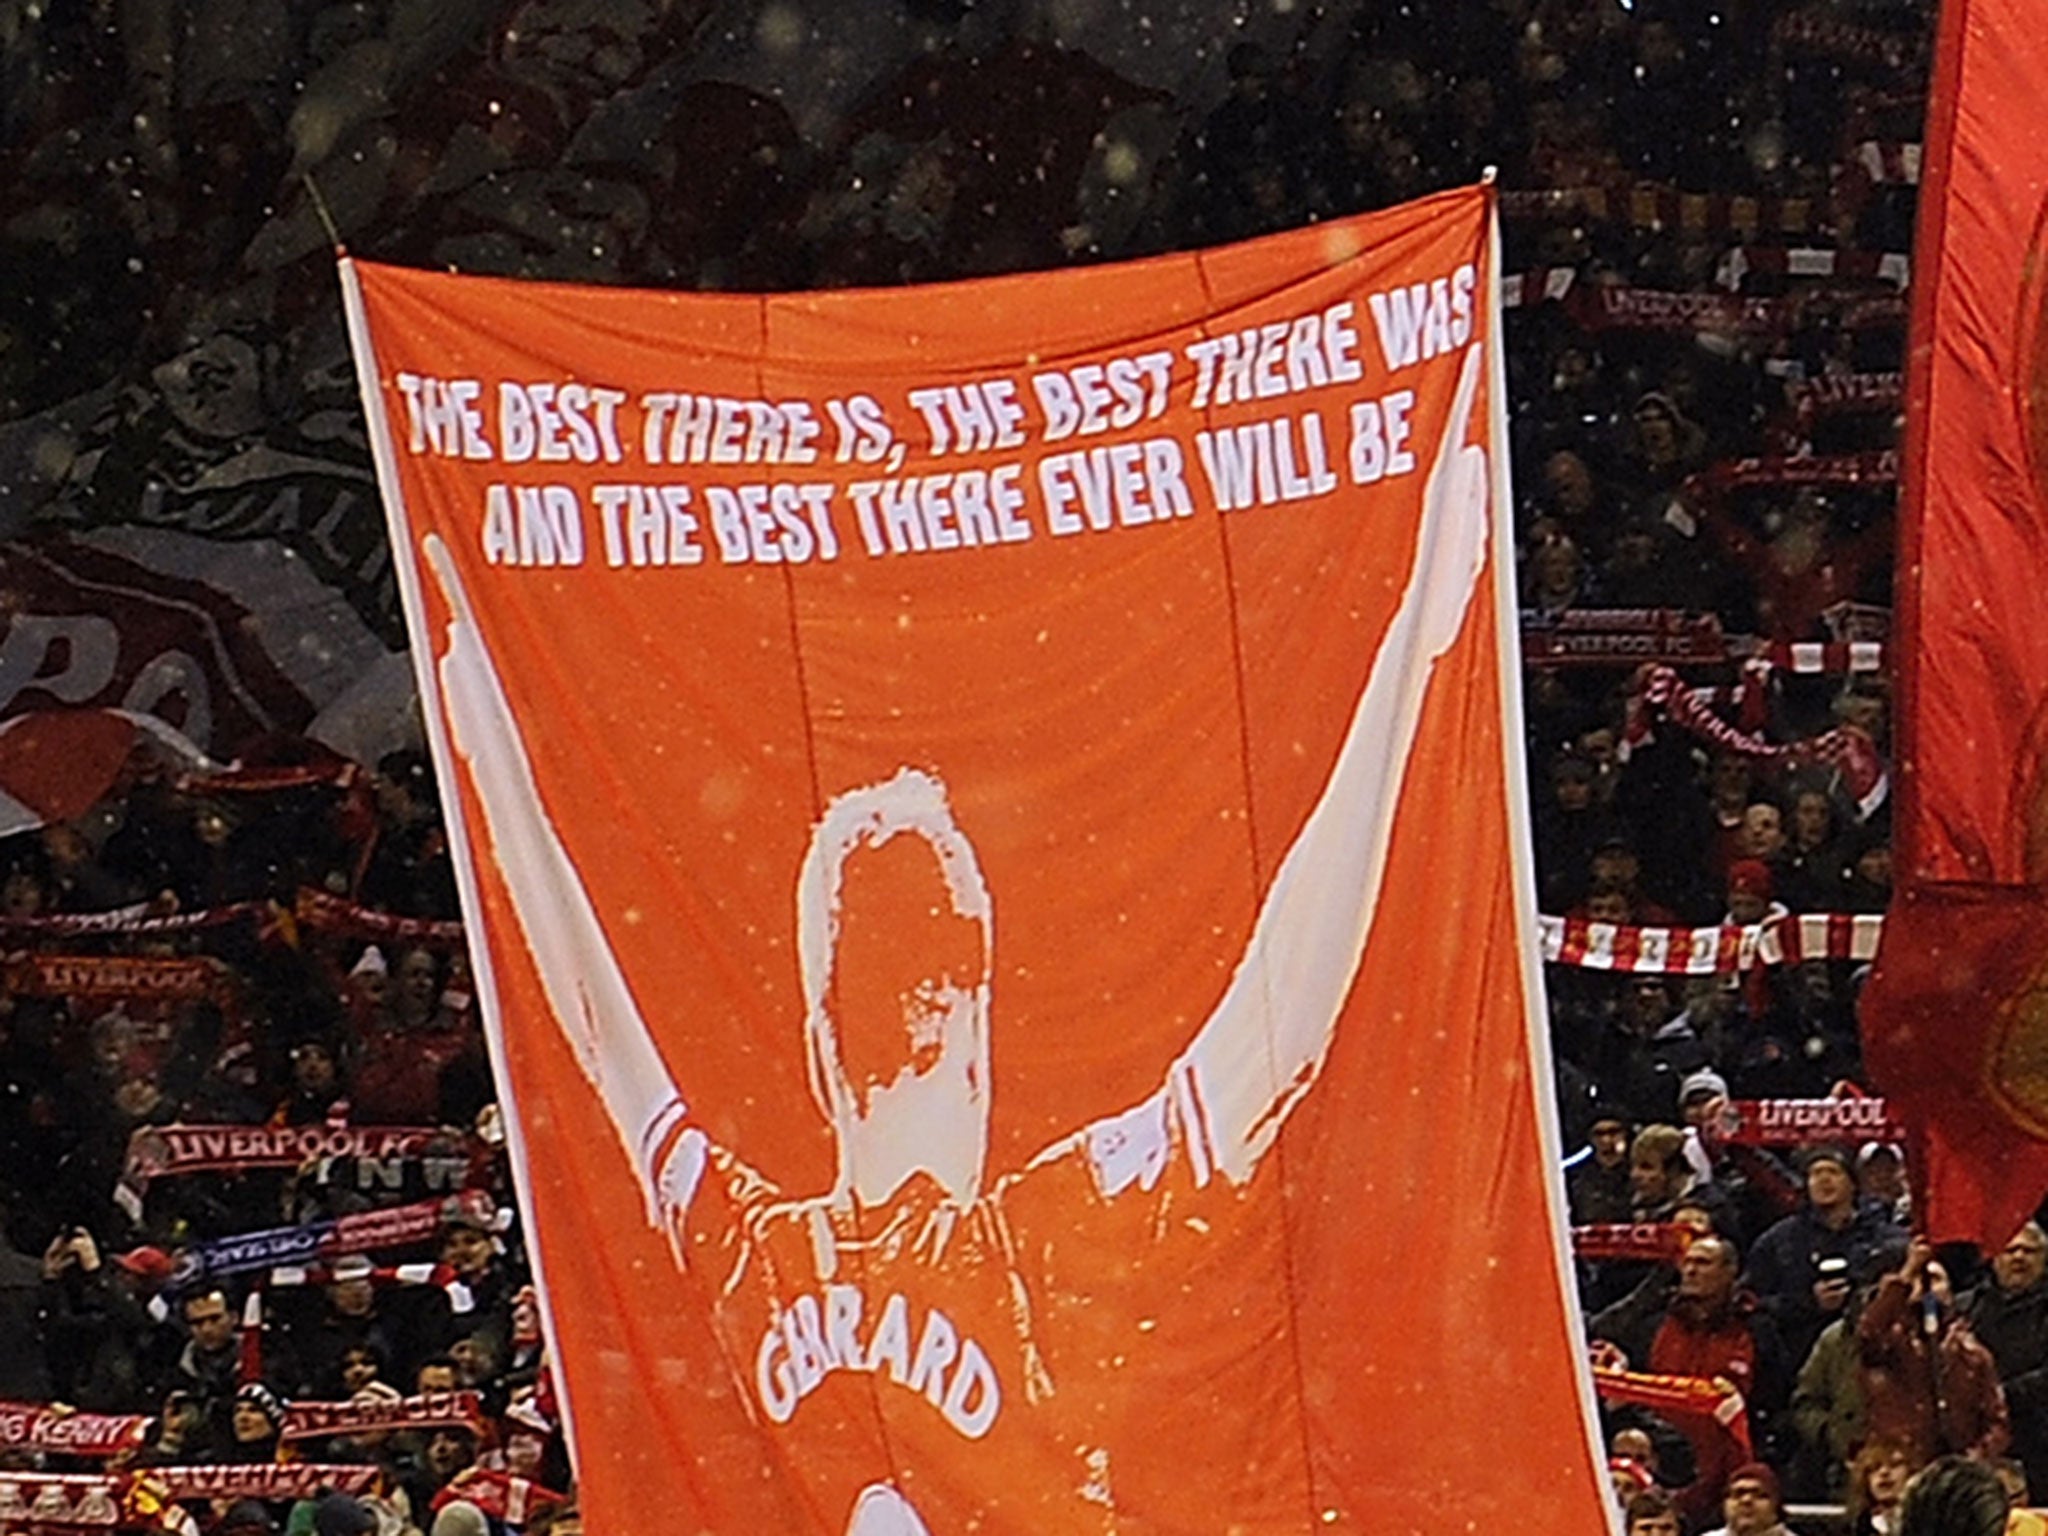 Gerrard's new banner at Anfield